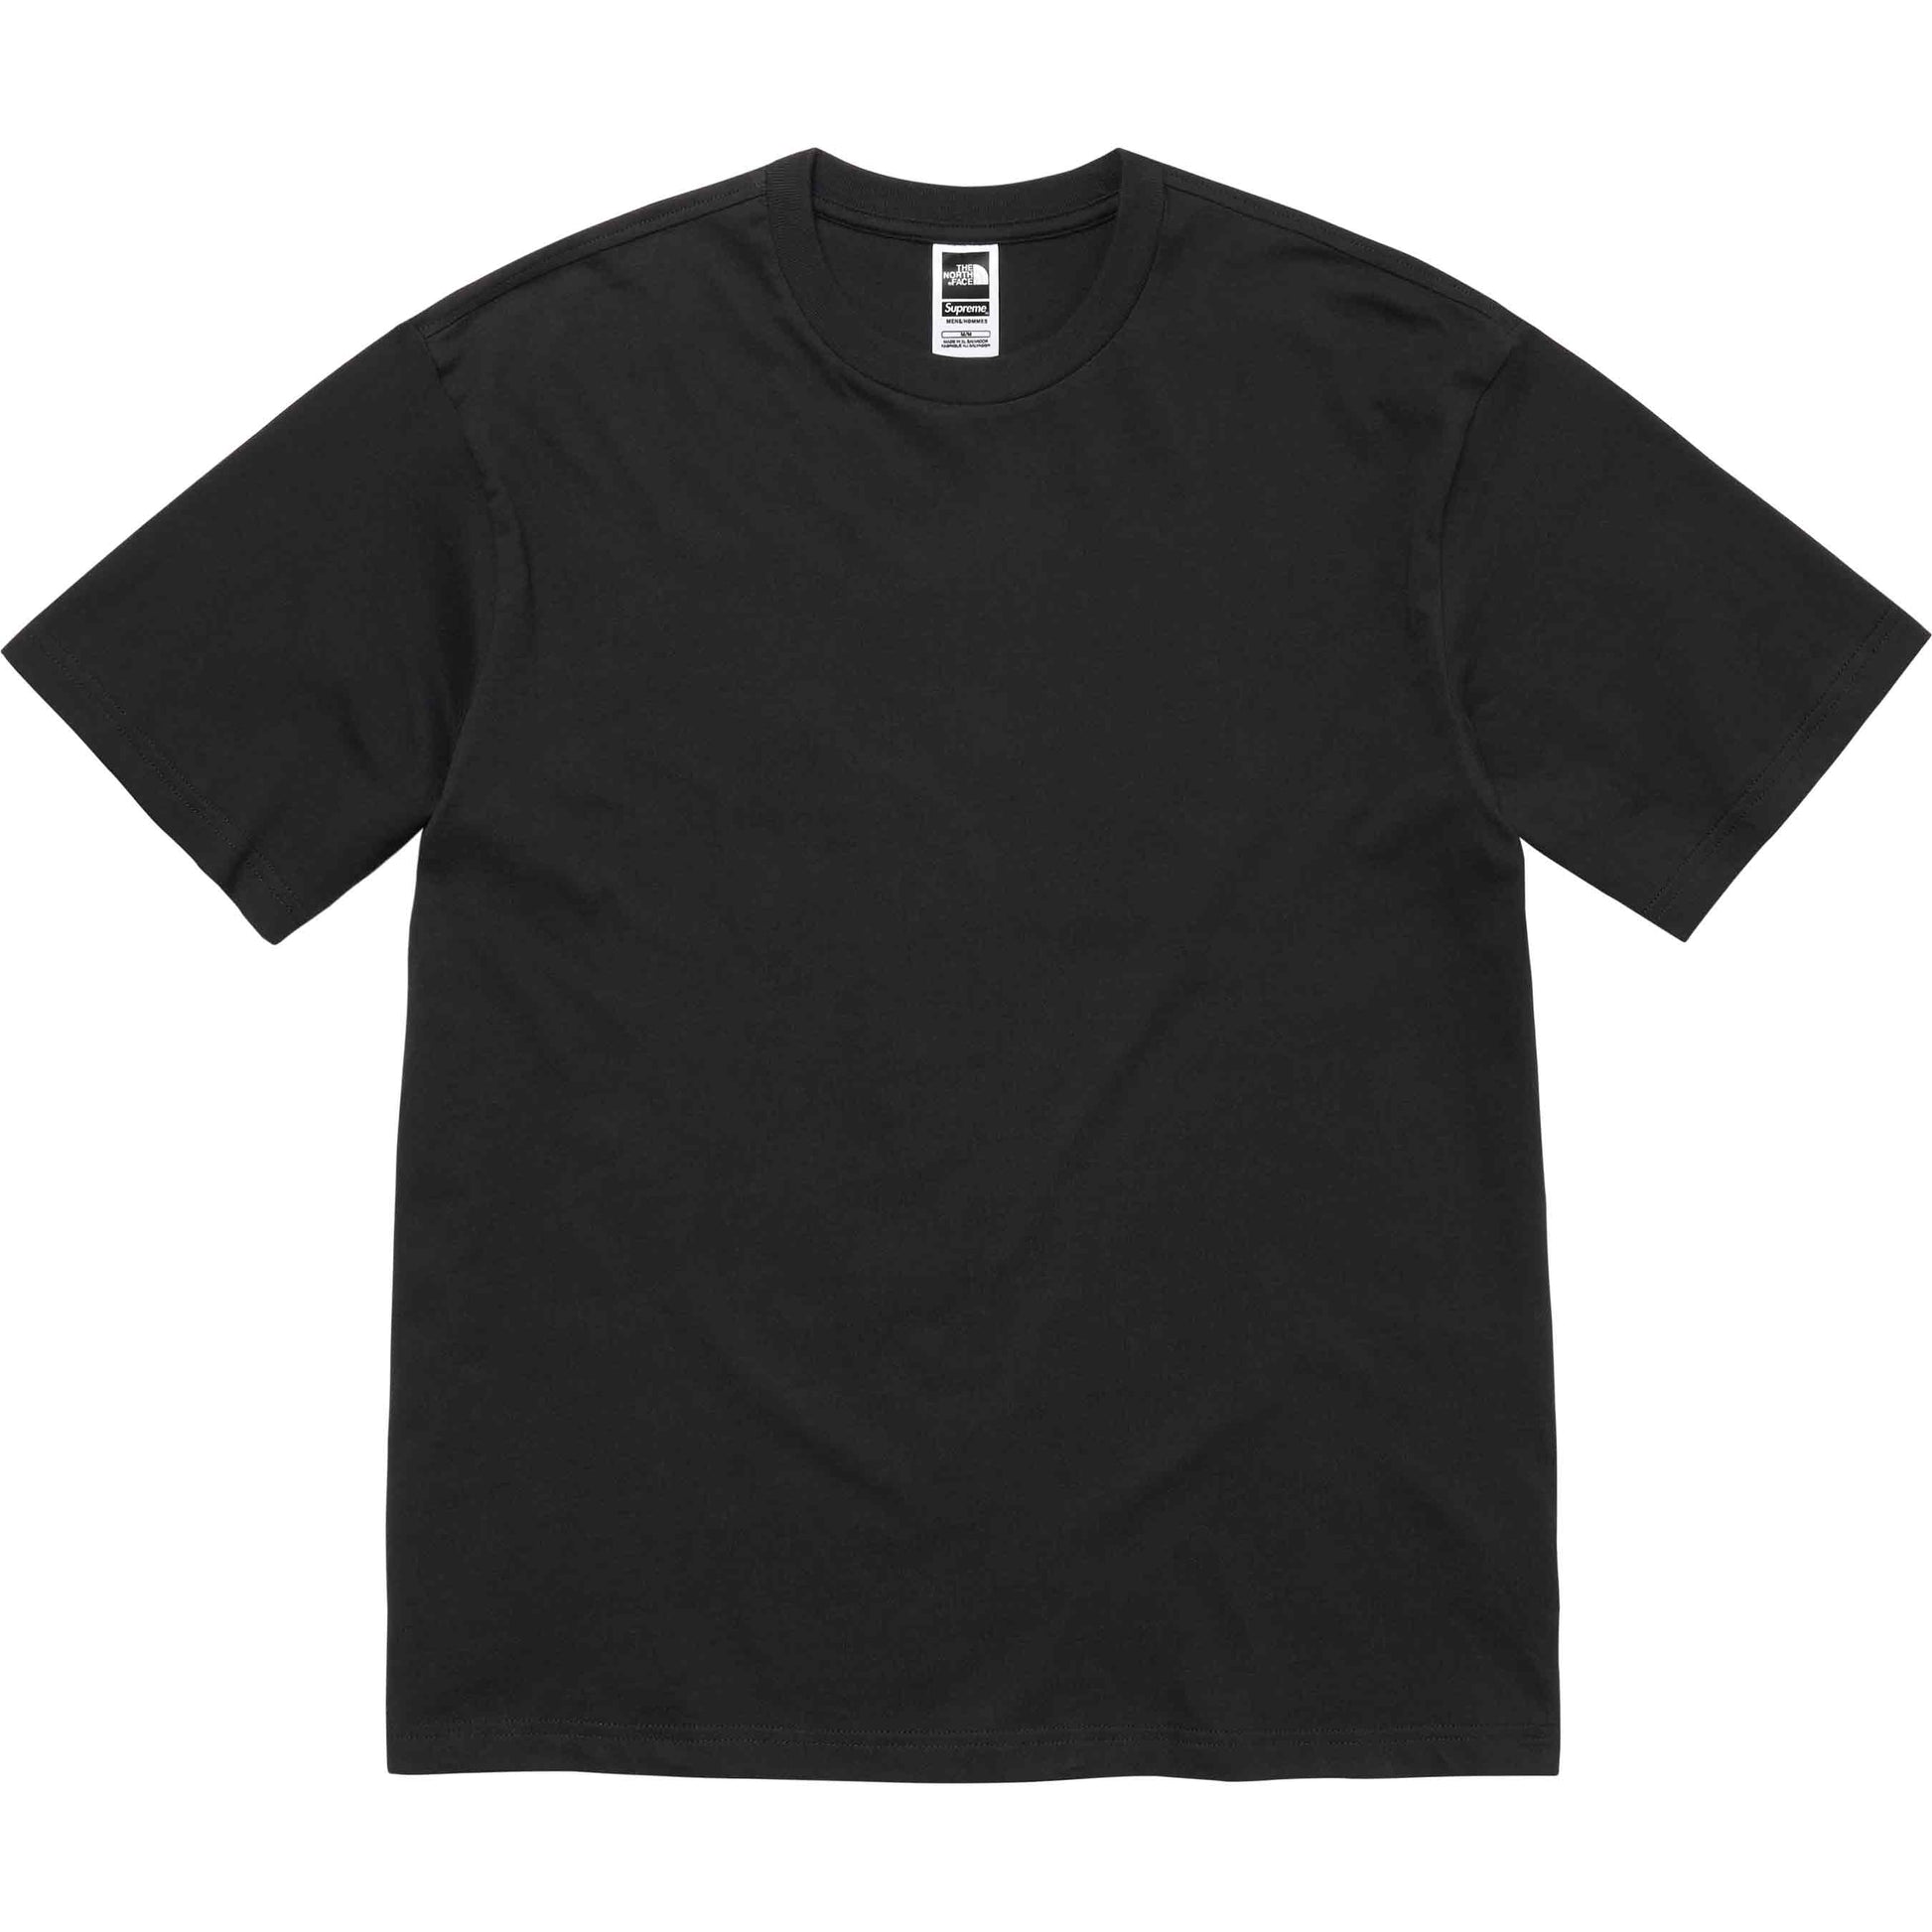 Supreme The North Face S/S Top Black by Supreme from £85.00